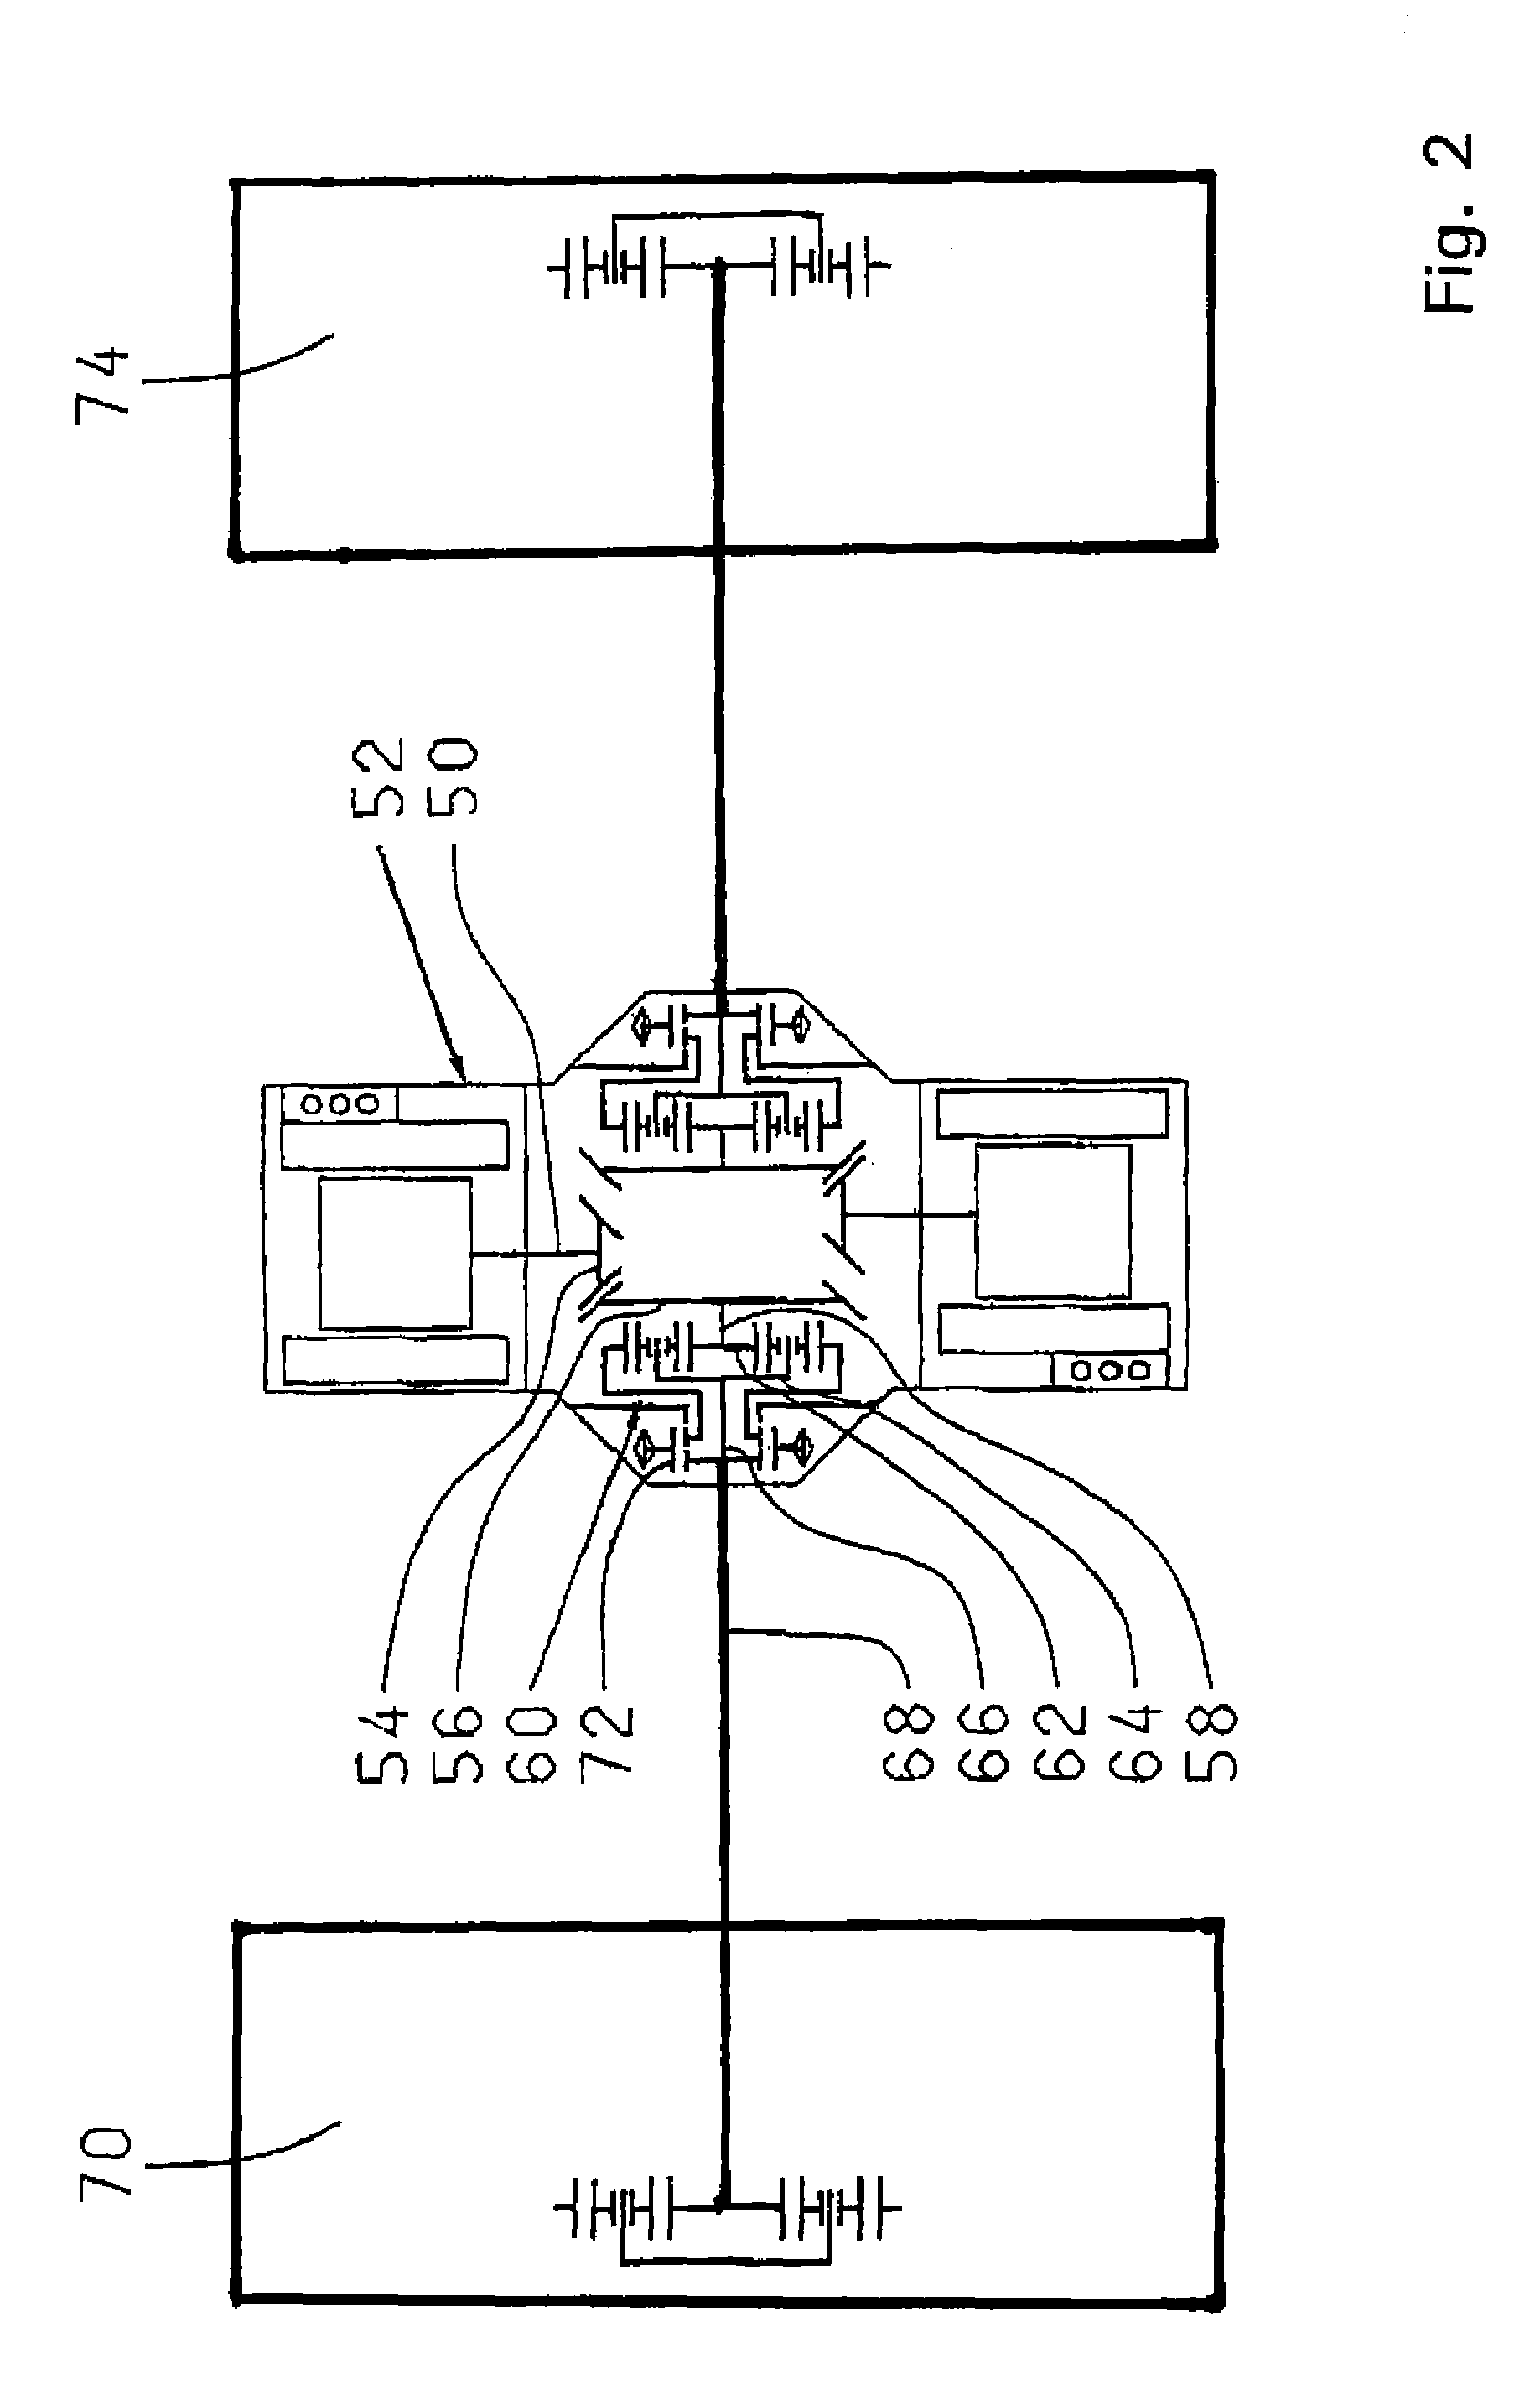 Drive system for individually driving two drive wheels of a drive wheel pair